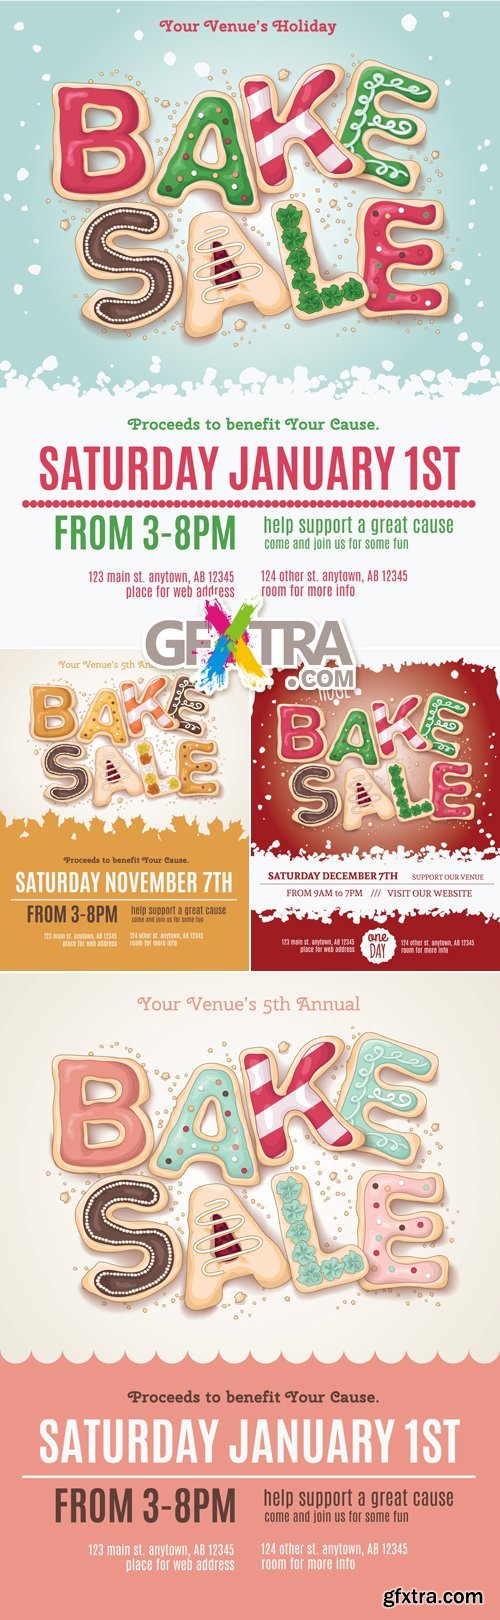 Bake Sale Posters Vector